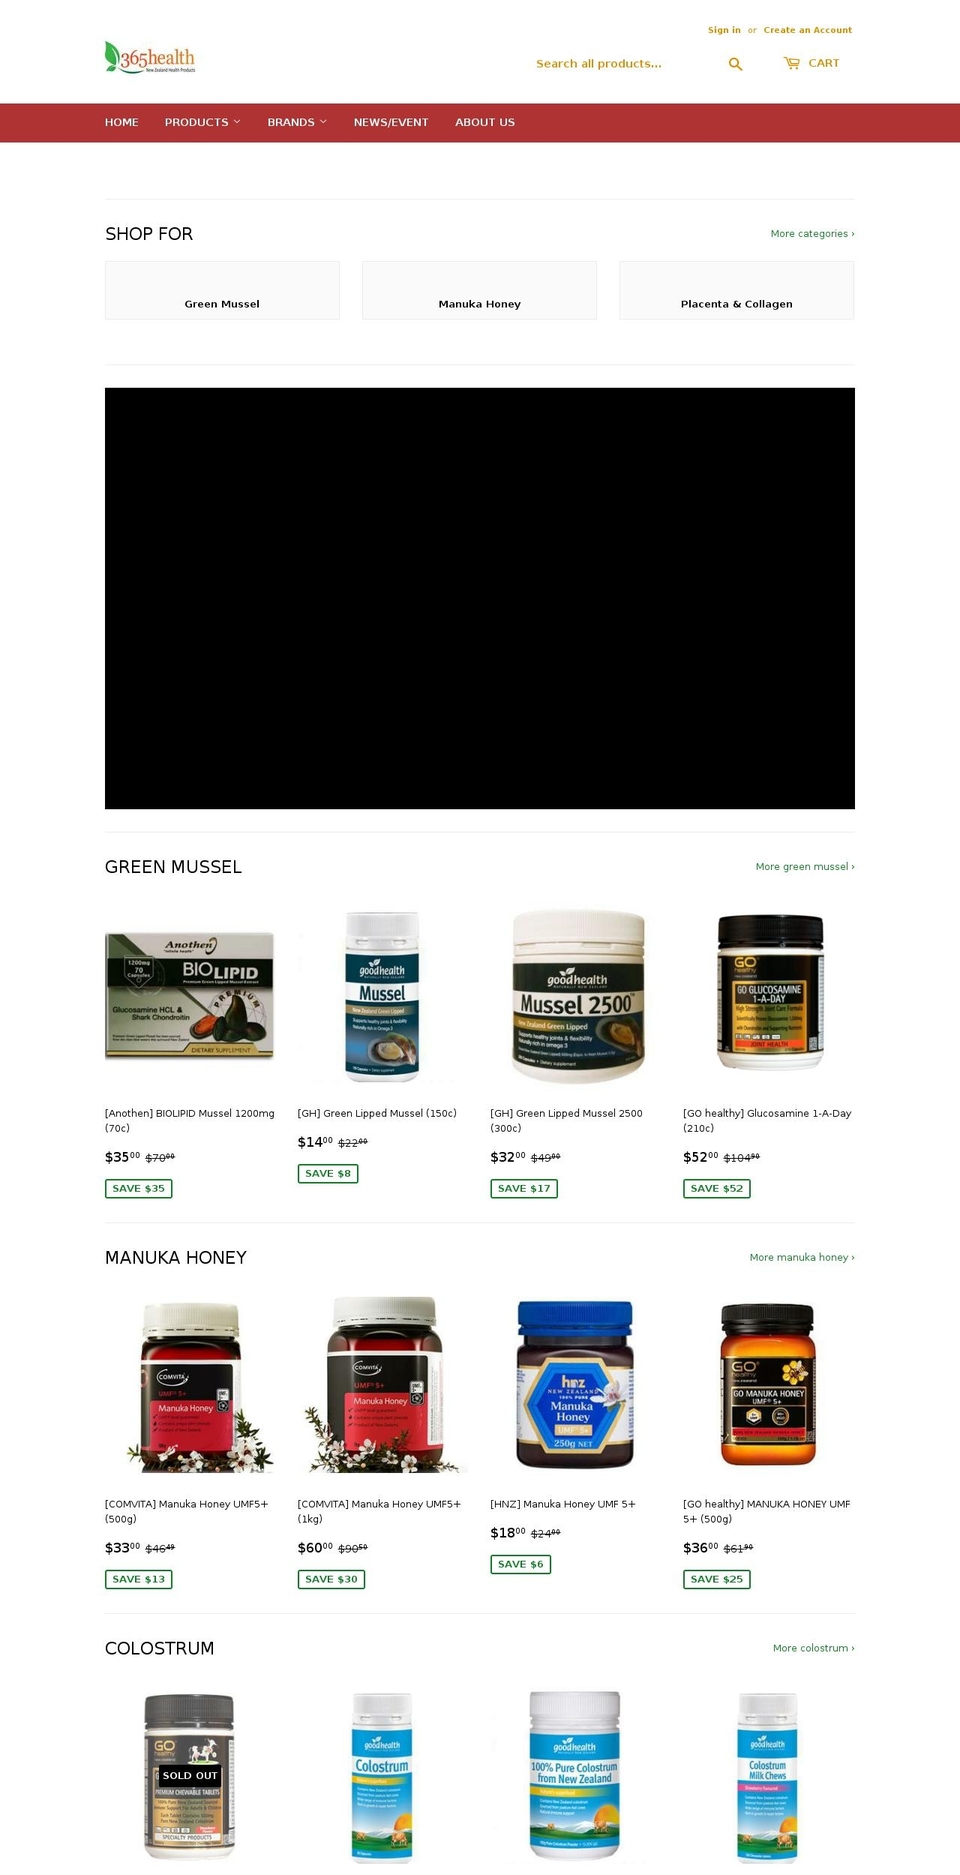 Maxmin Shopify theme site example 365health.co.nz